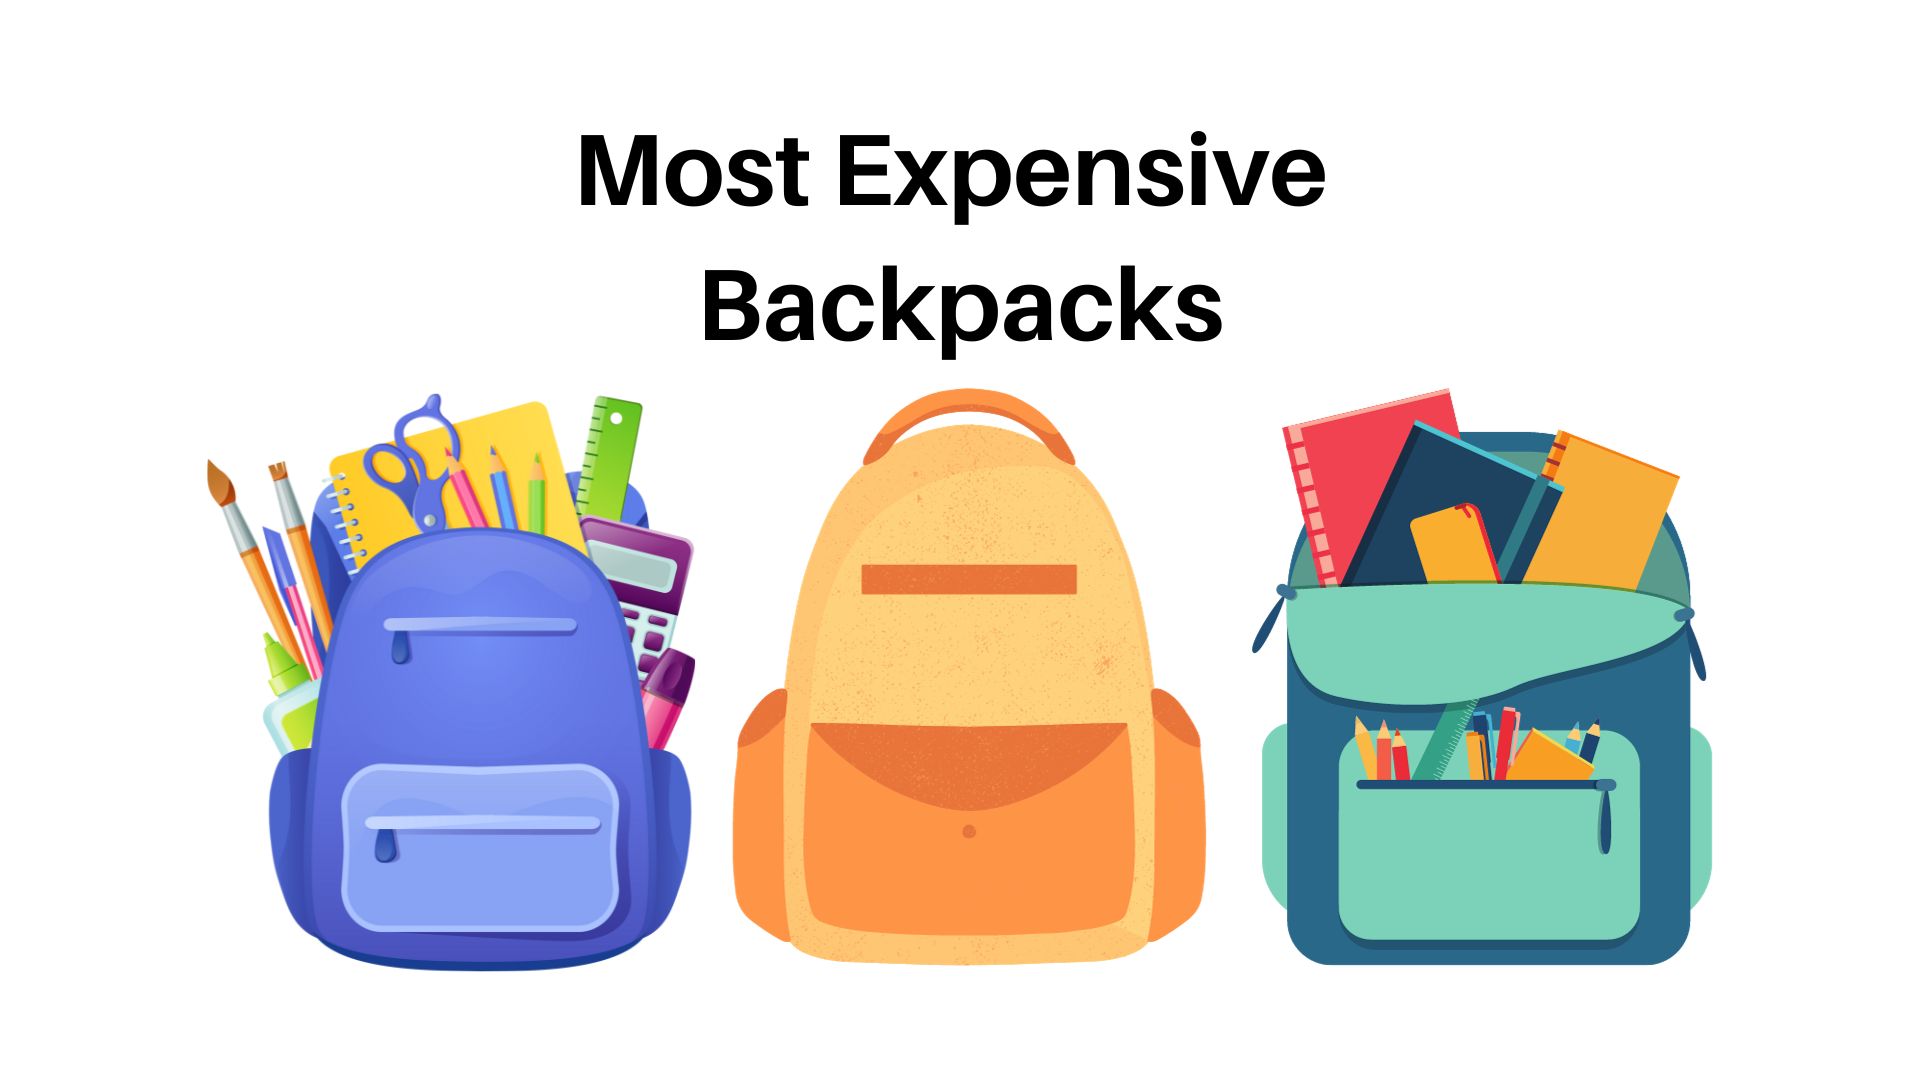 famous expensive backpacks